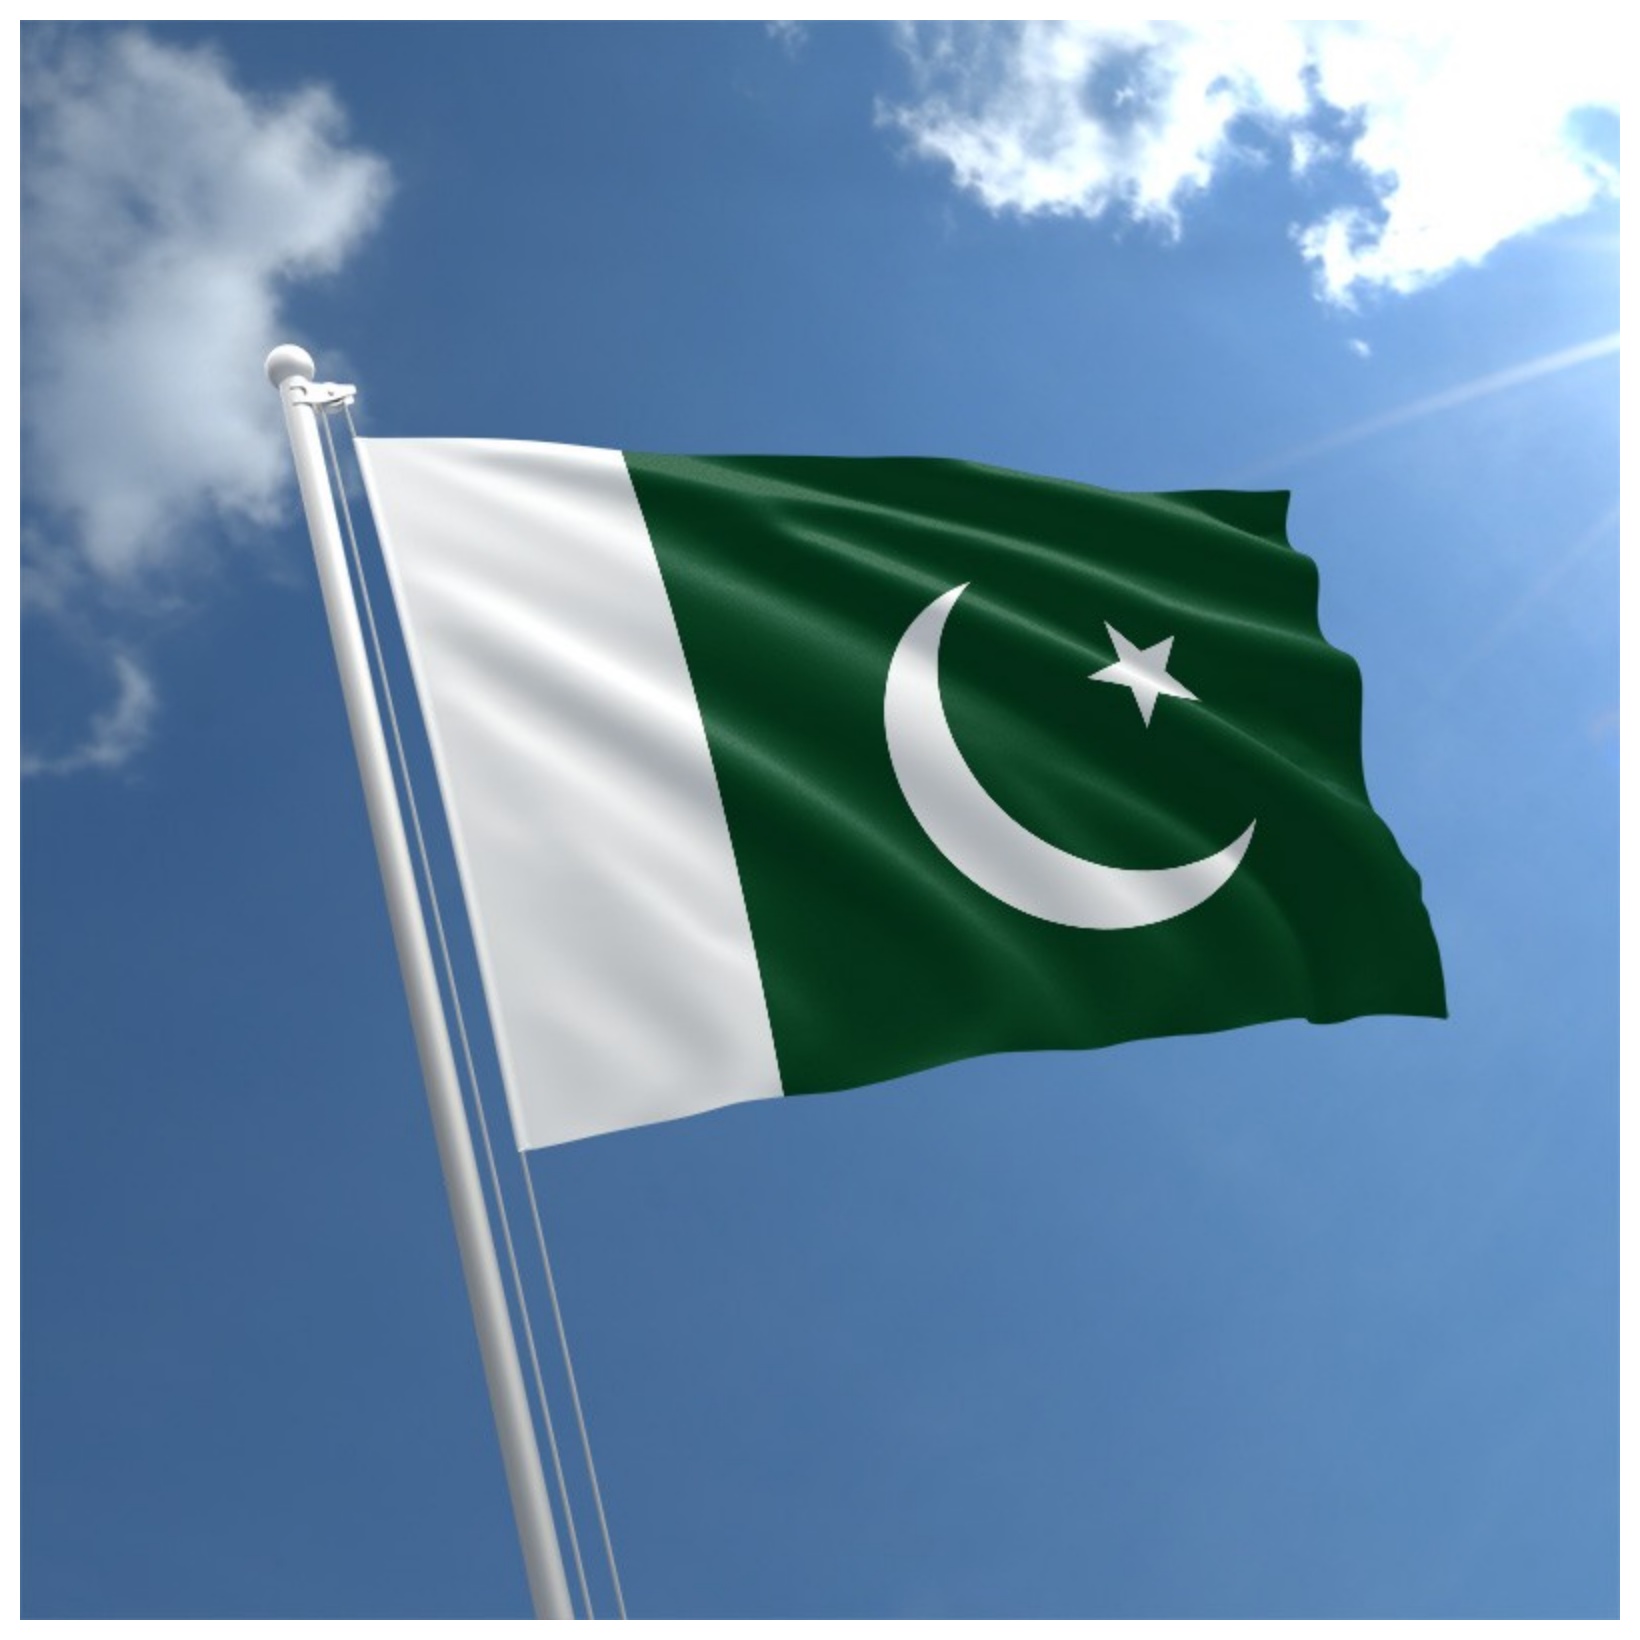 Pakistan accedes to the Apostille Convention